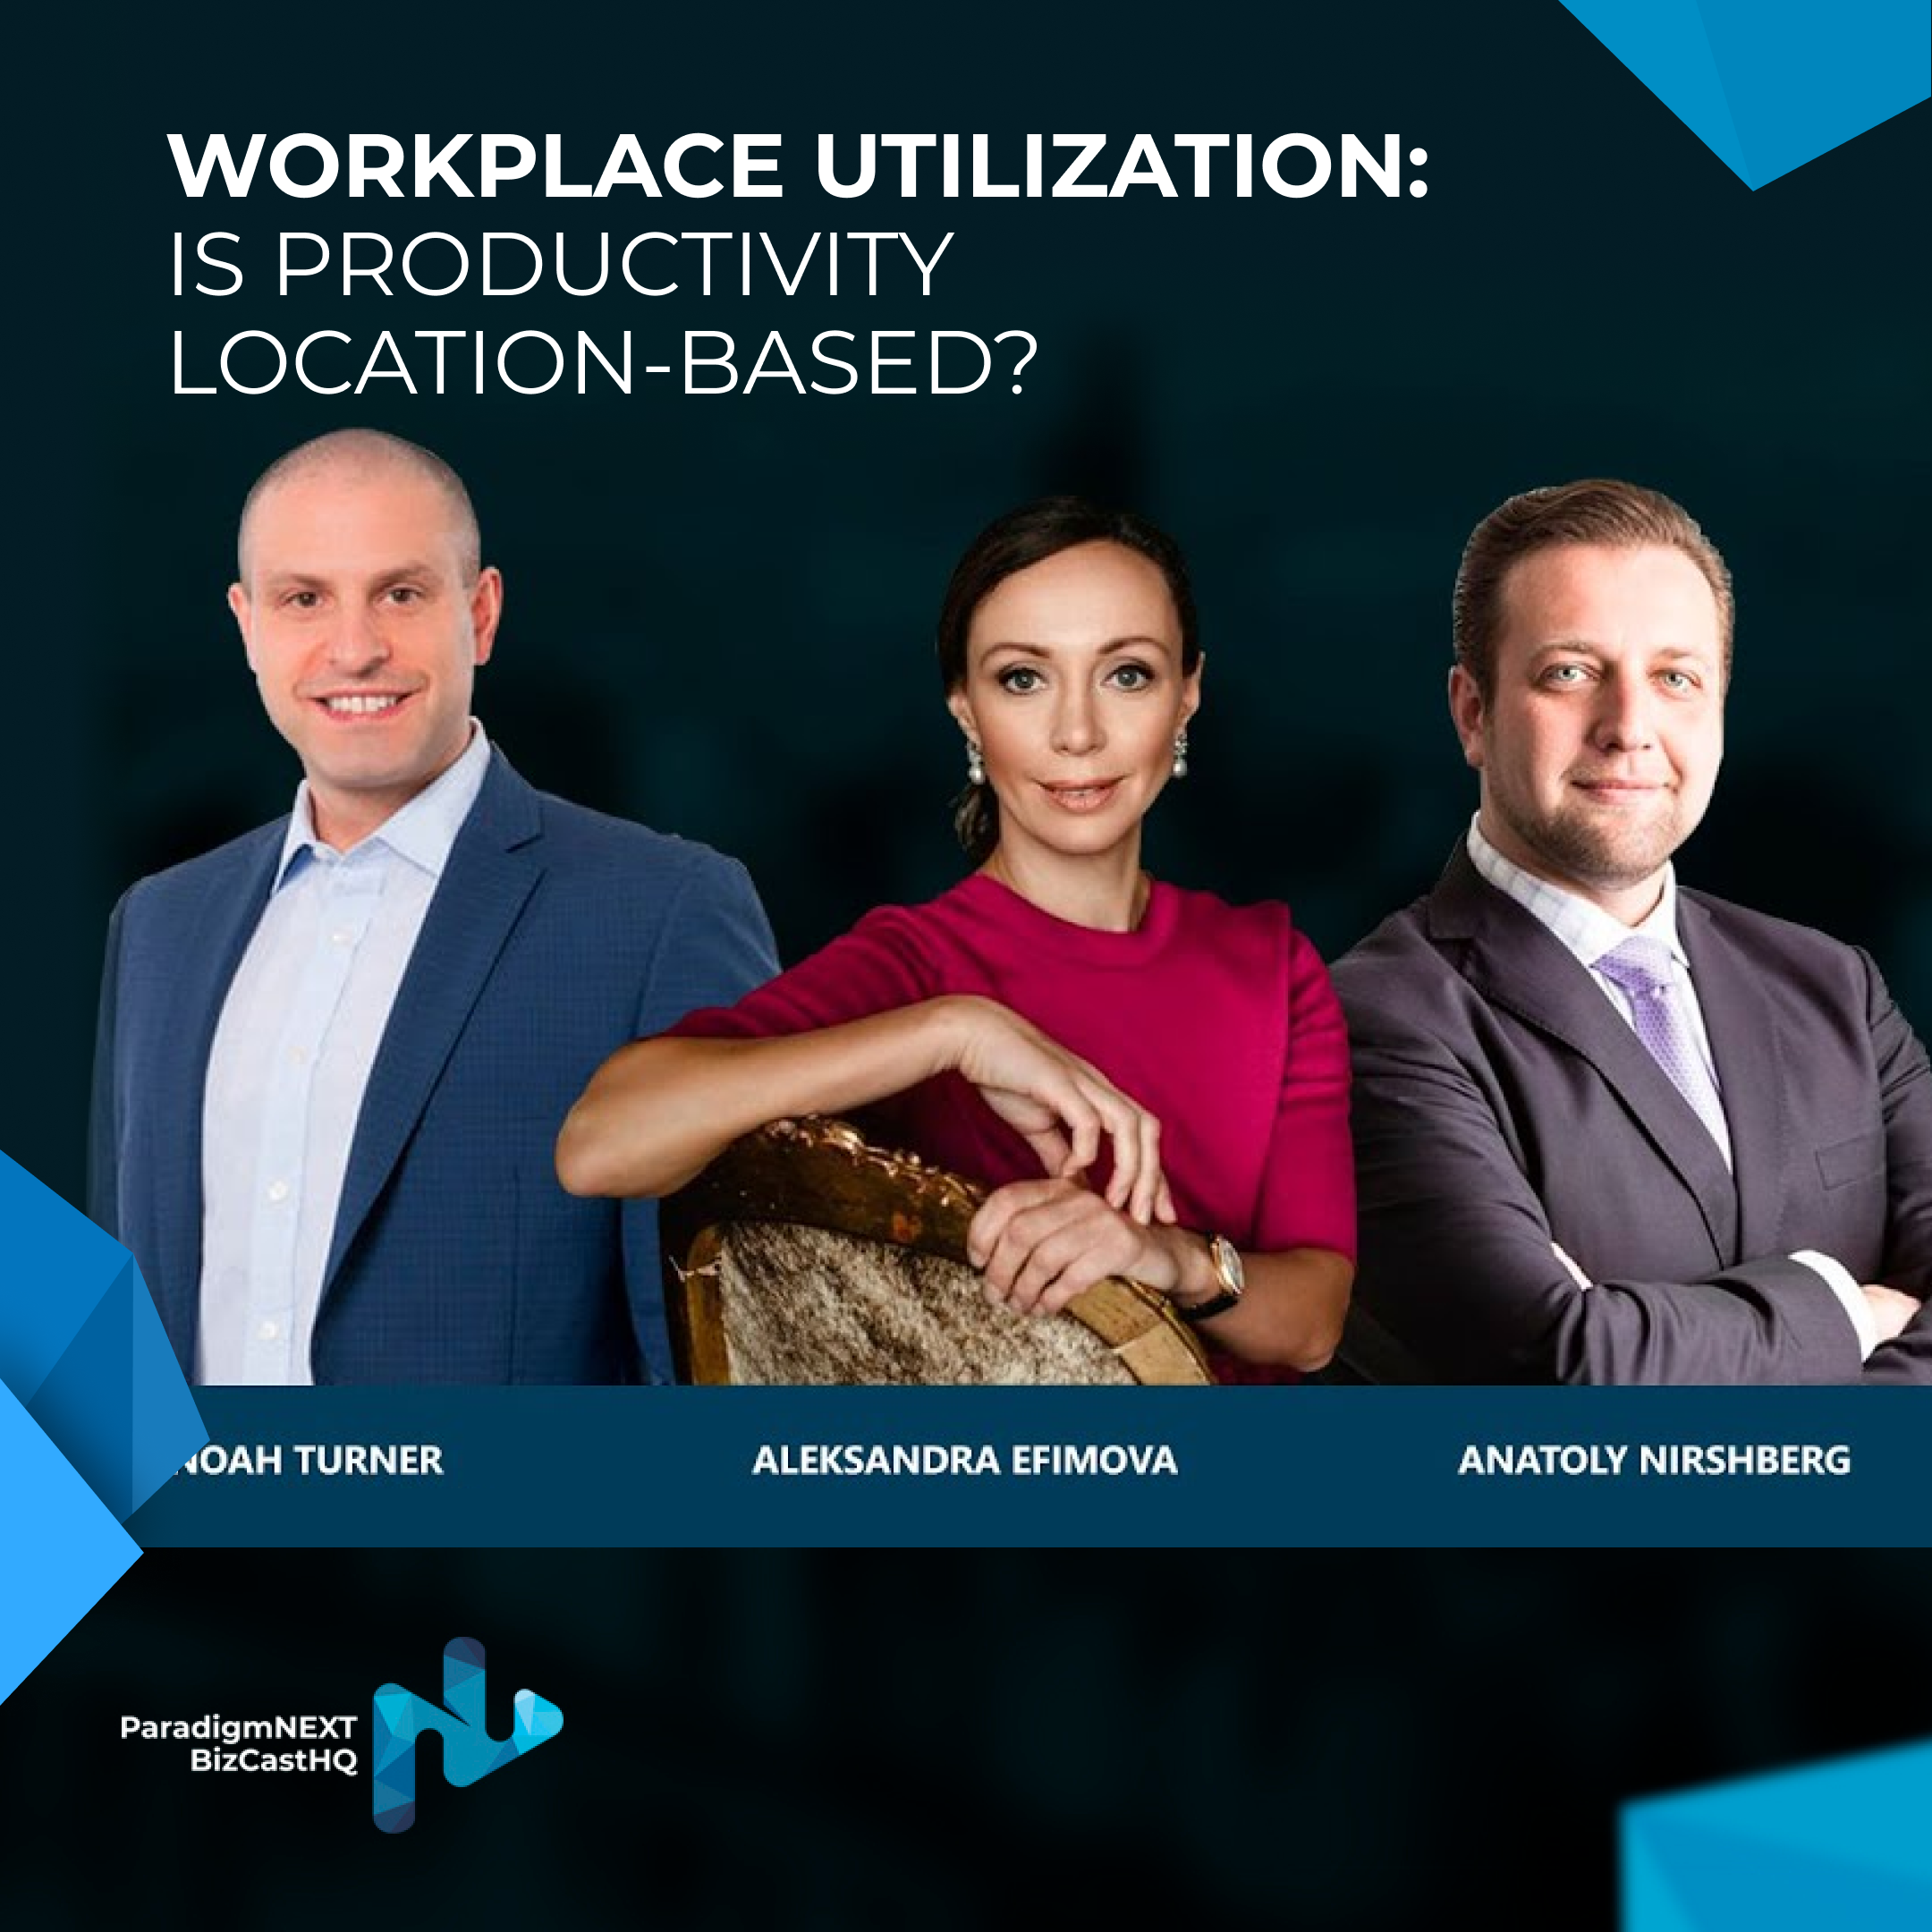 Workplace Utilization: Is Productivity Location-Based?